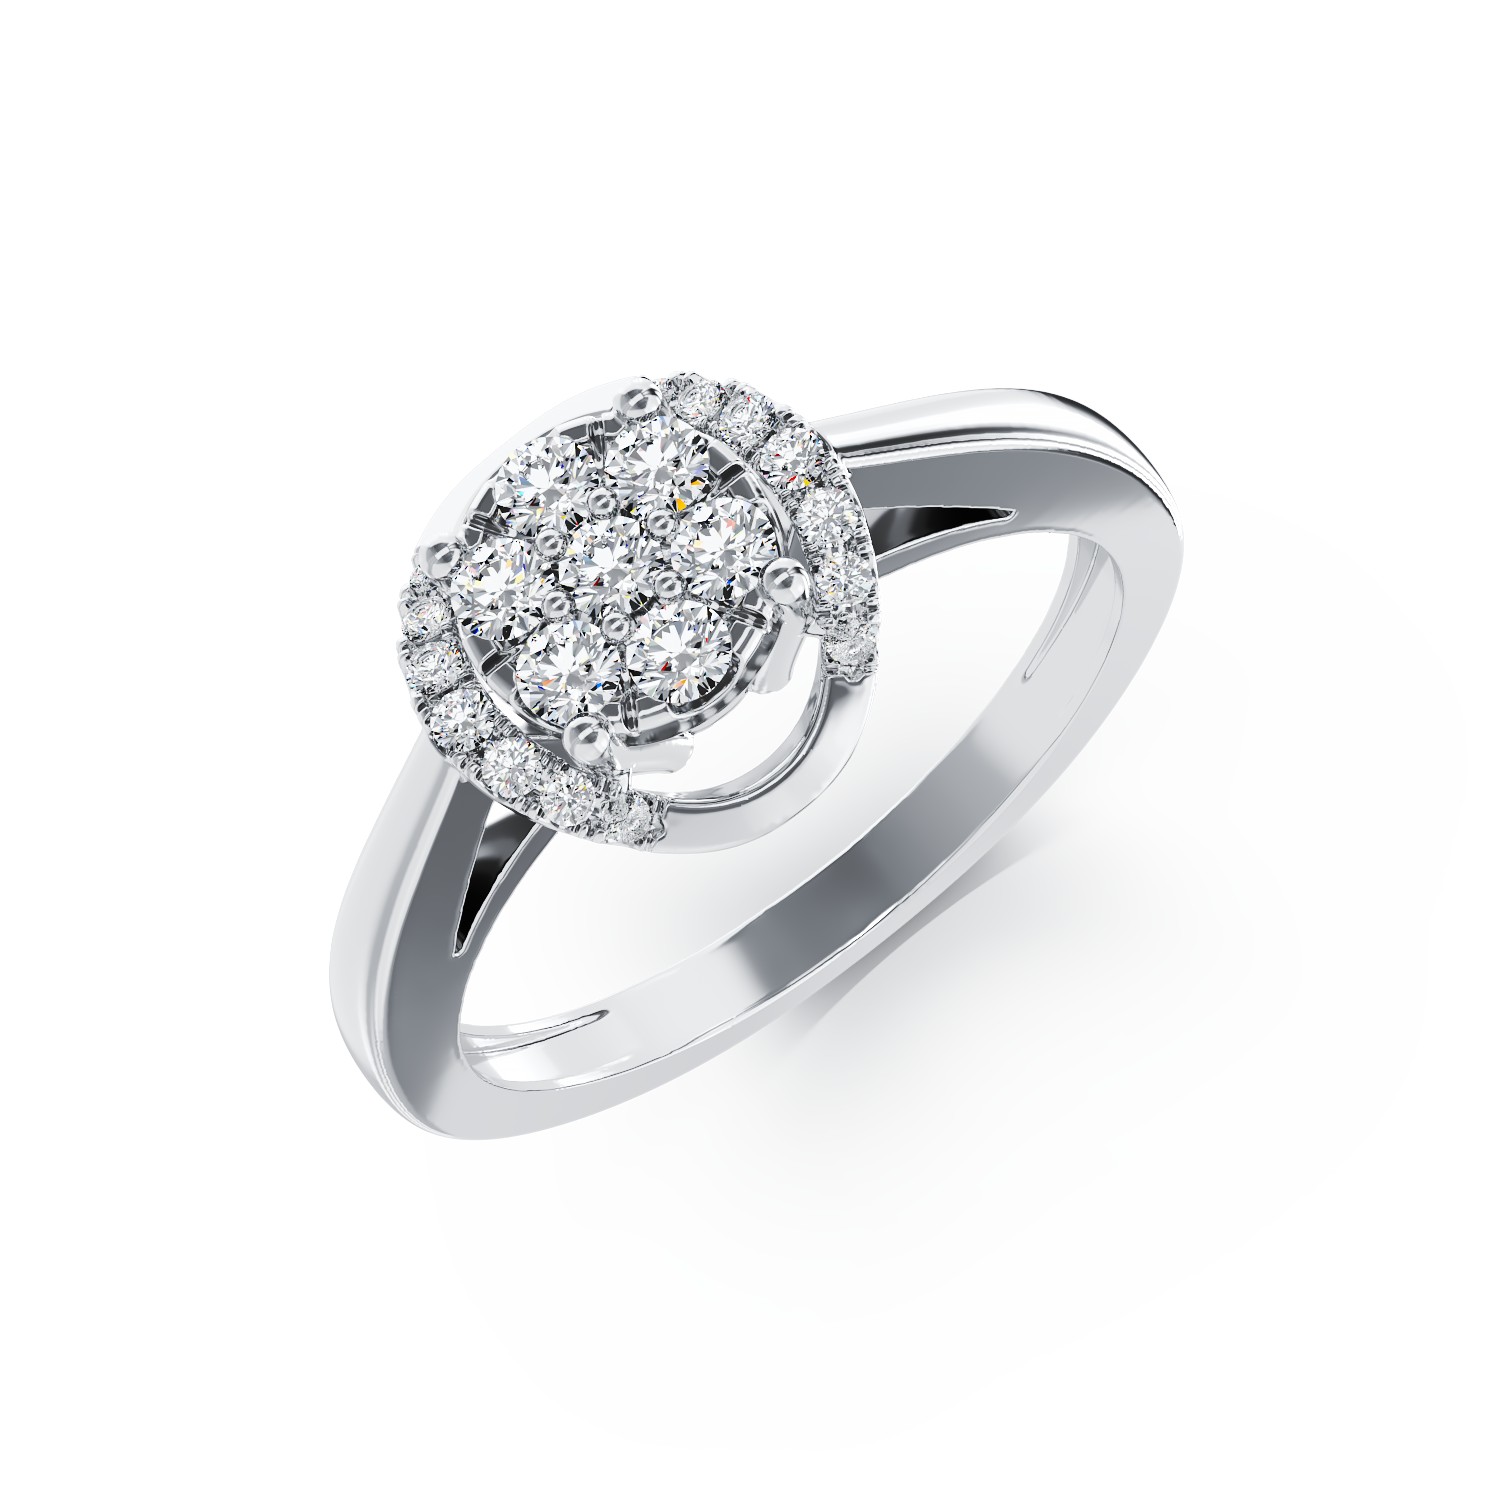 18K white gold engagement ring with 0.24ct diamonds